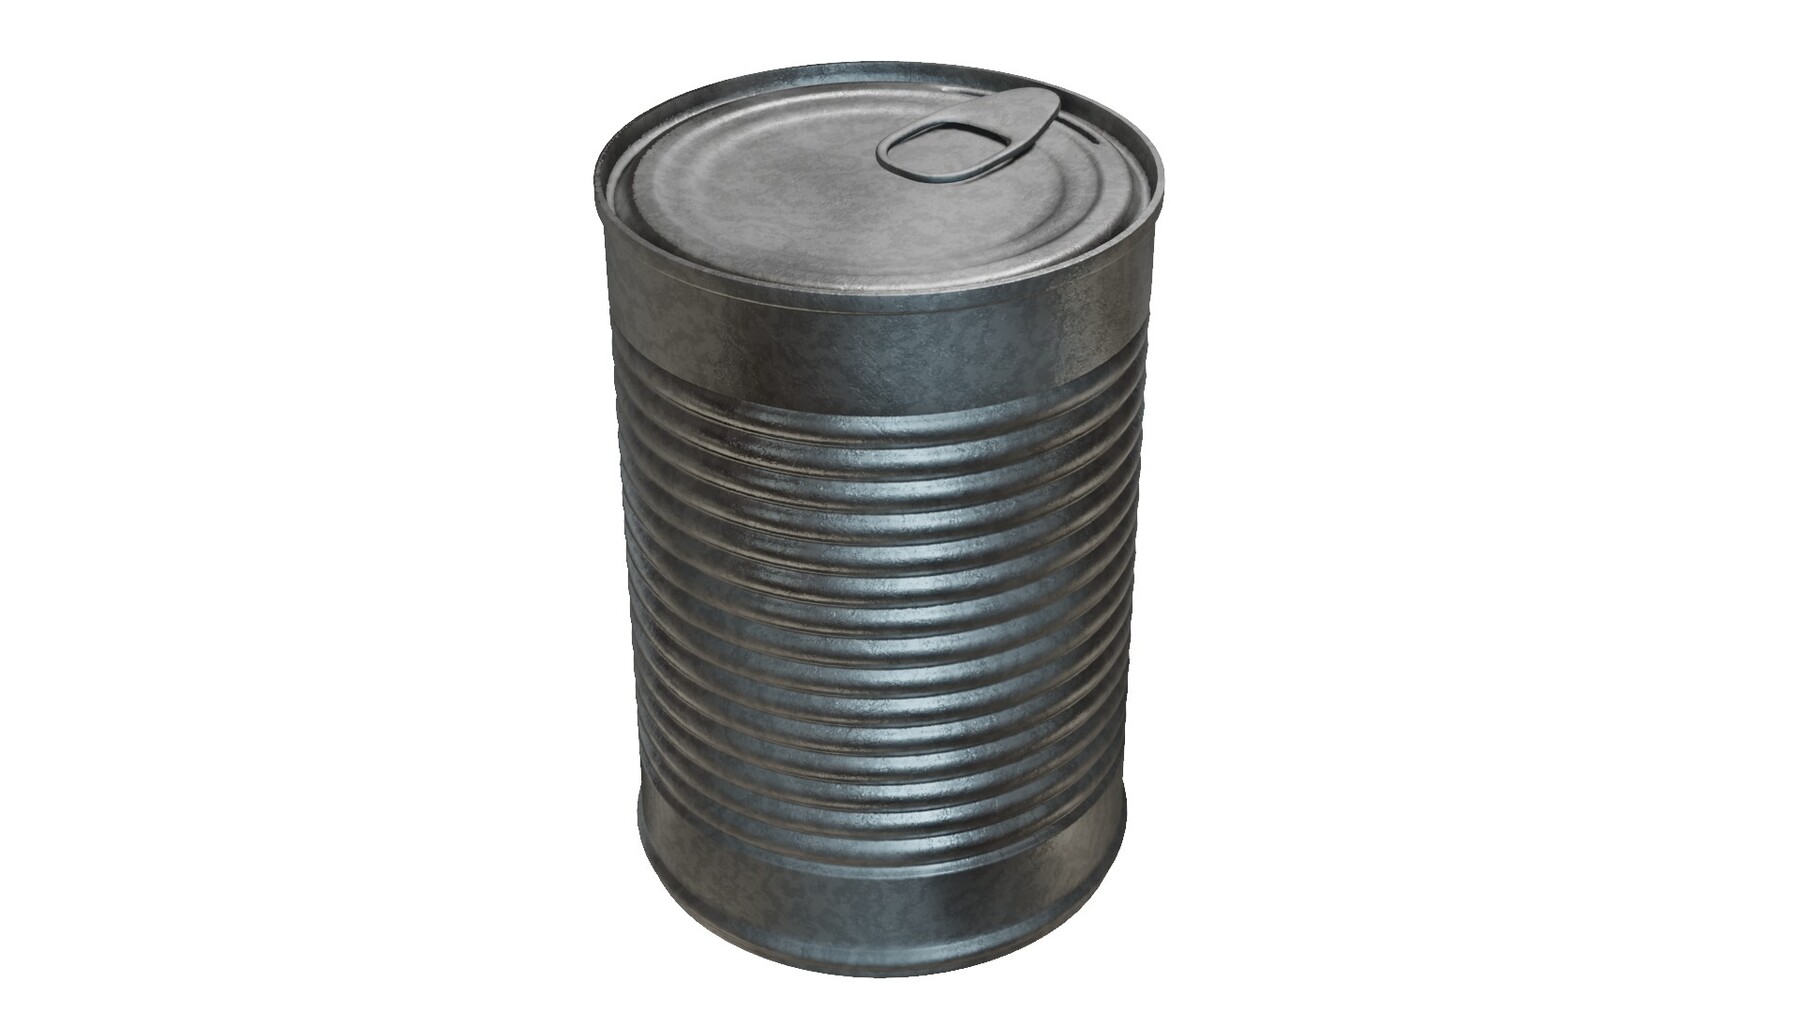 209,395 Tin Can Images, Stock Photos, 3D objects, & Vectors